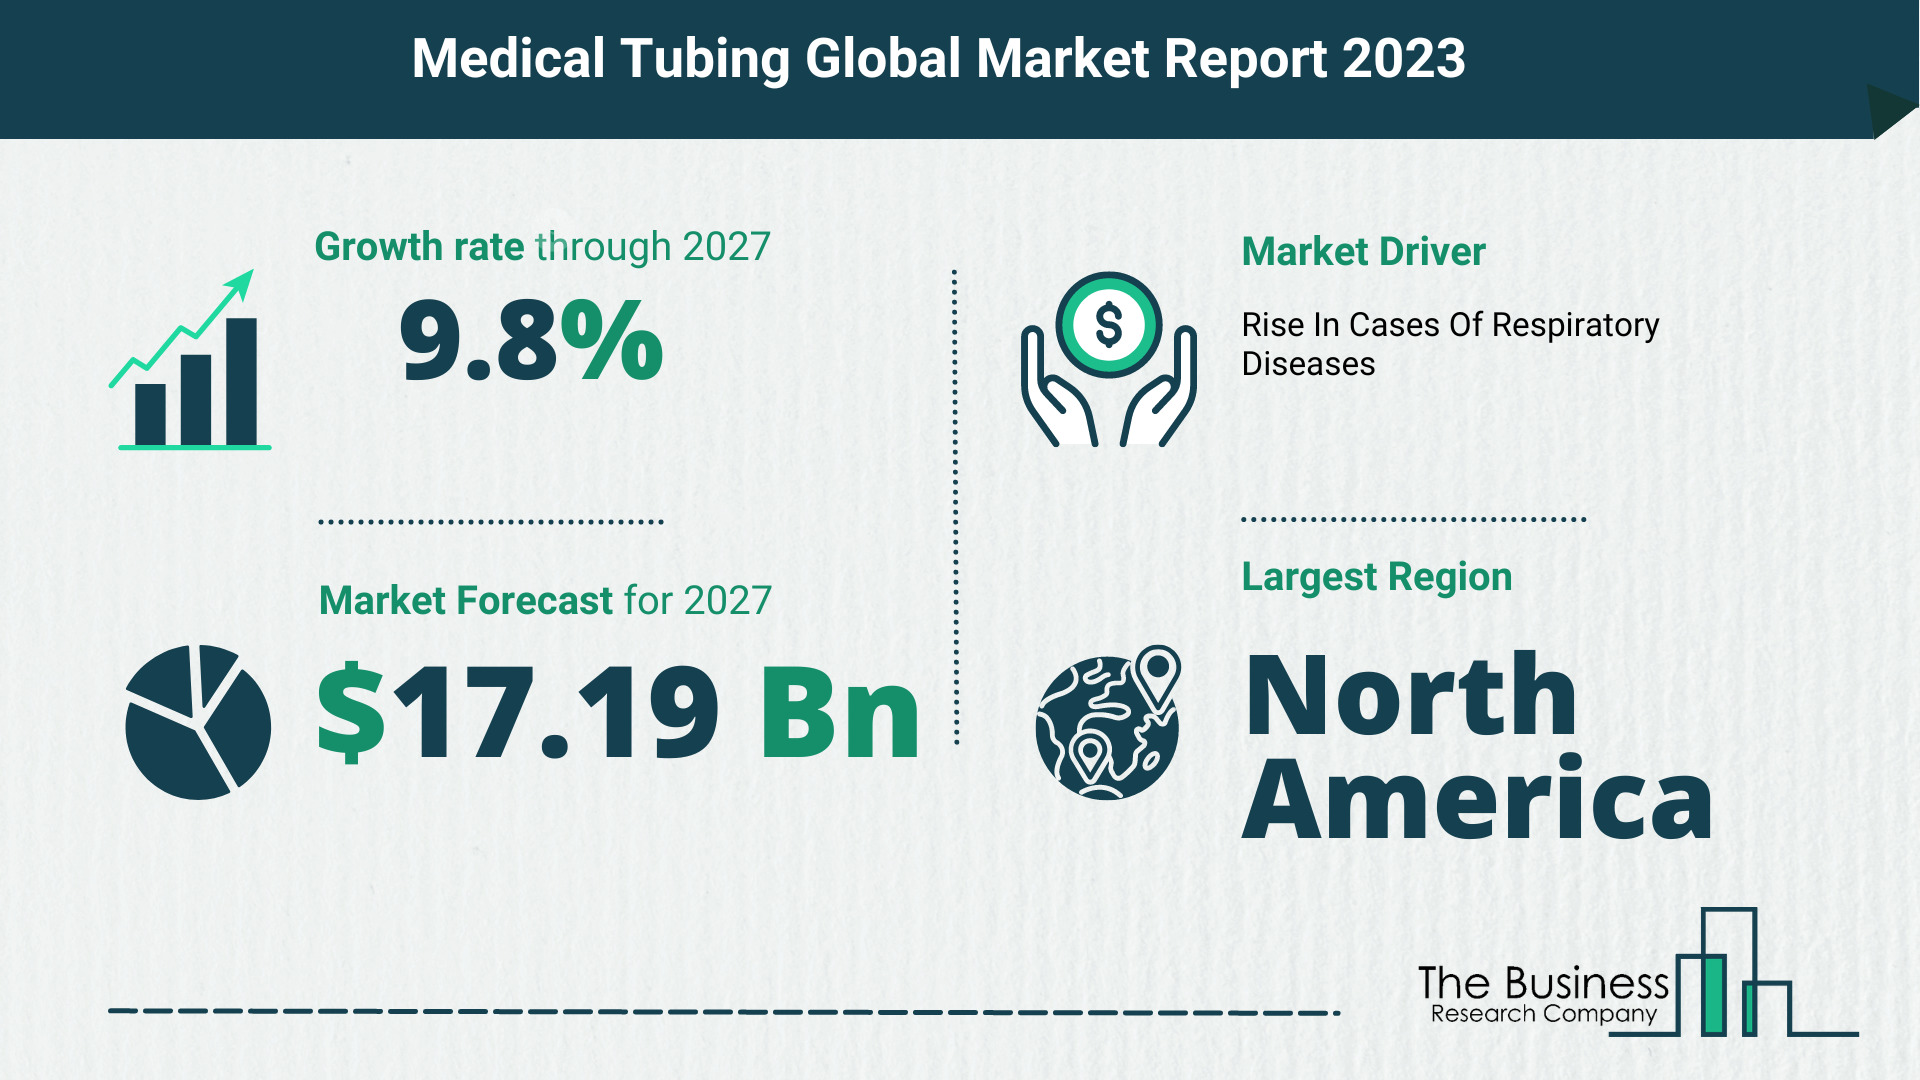 Medical Tubing Market Size, Share, And Growth Rate Analysis 2023